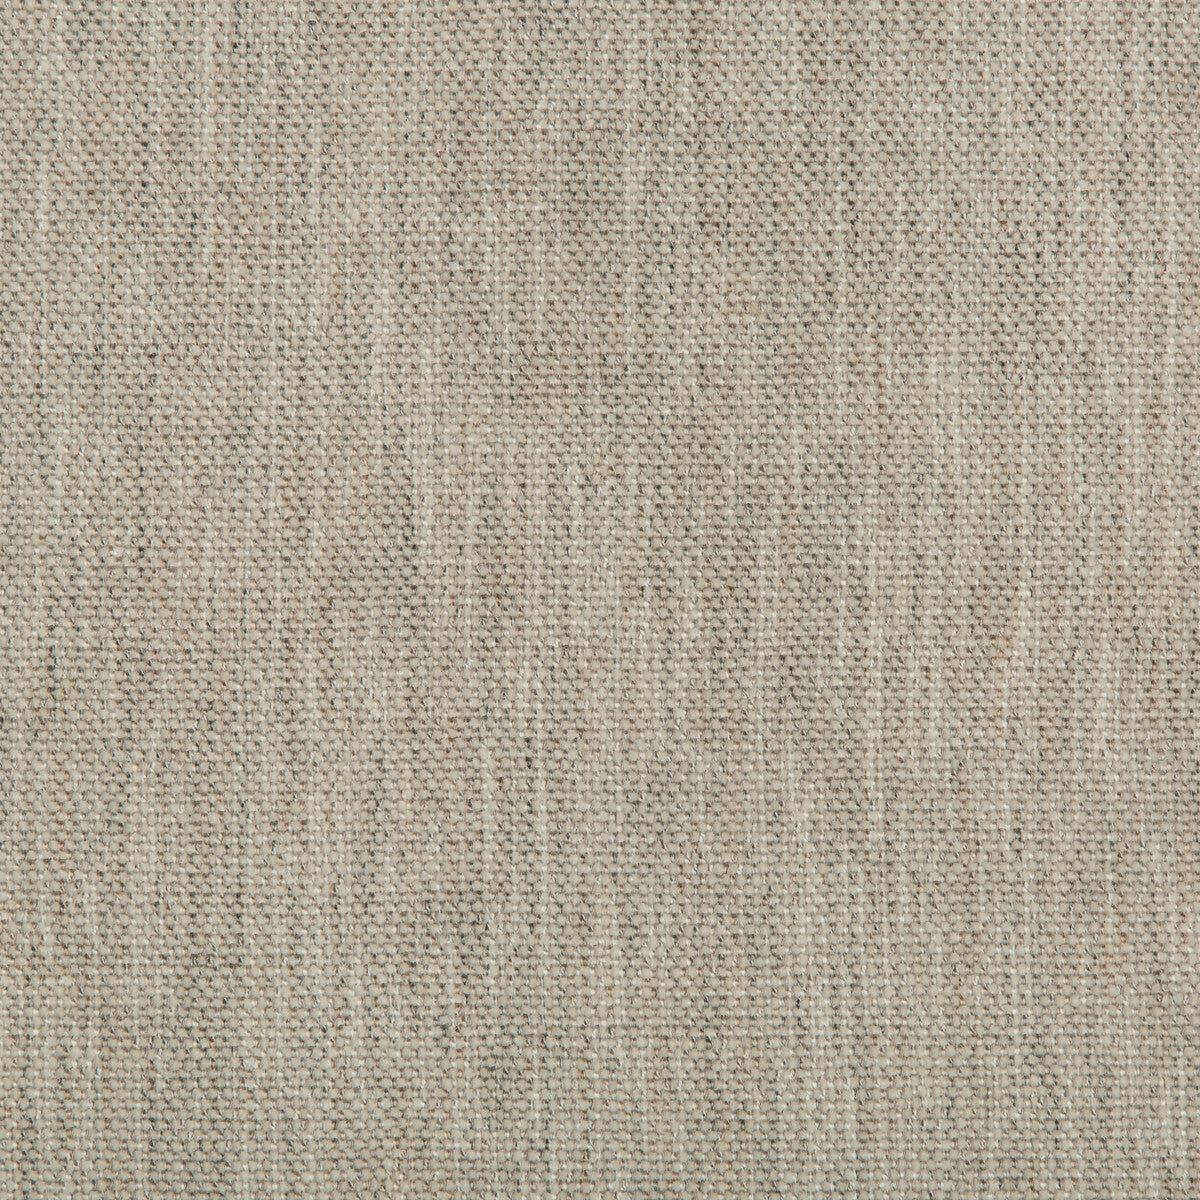 Kravet Couture fabric in 34797-1121 color - pattern 34797.1121.0 - by Kravet Couture in the Mabley Handler collection